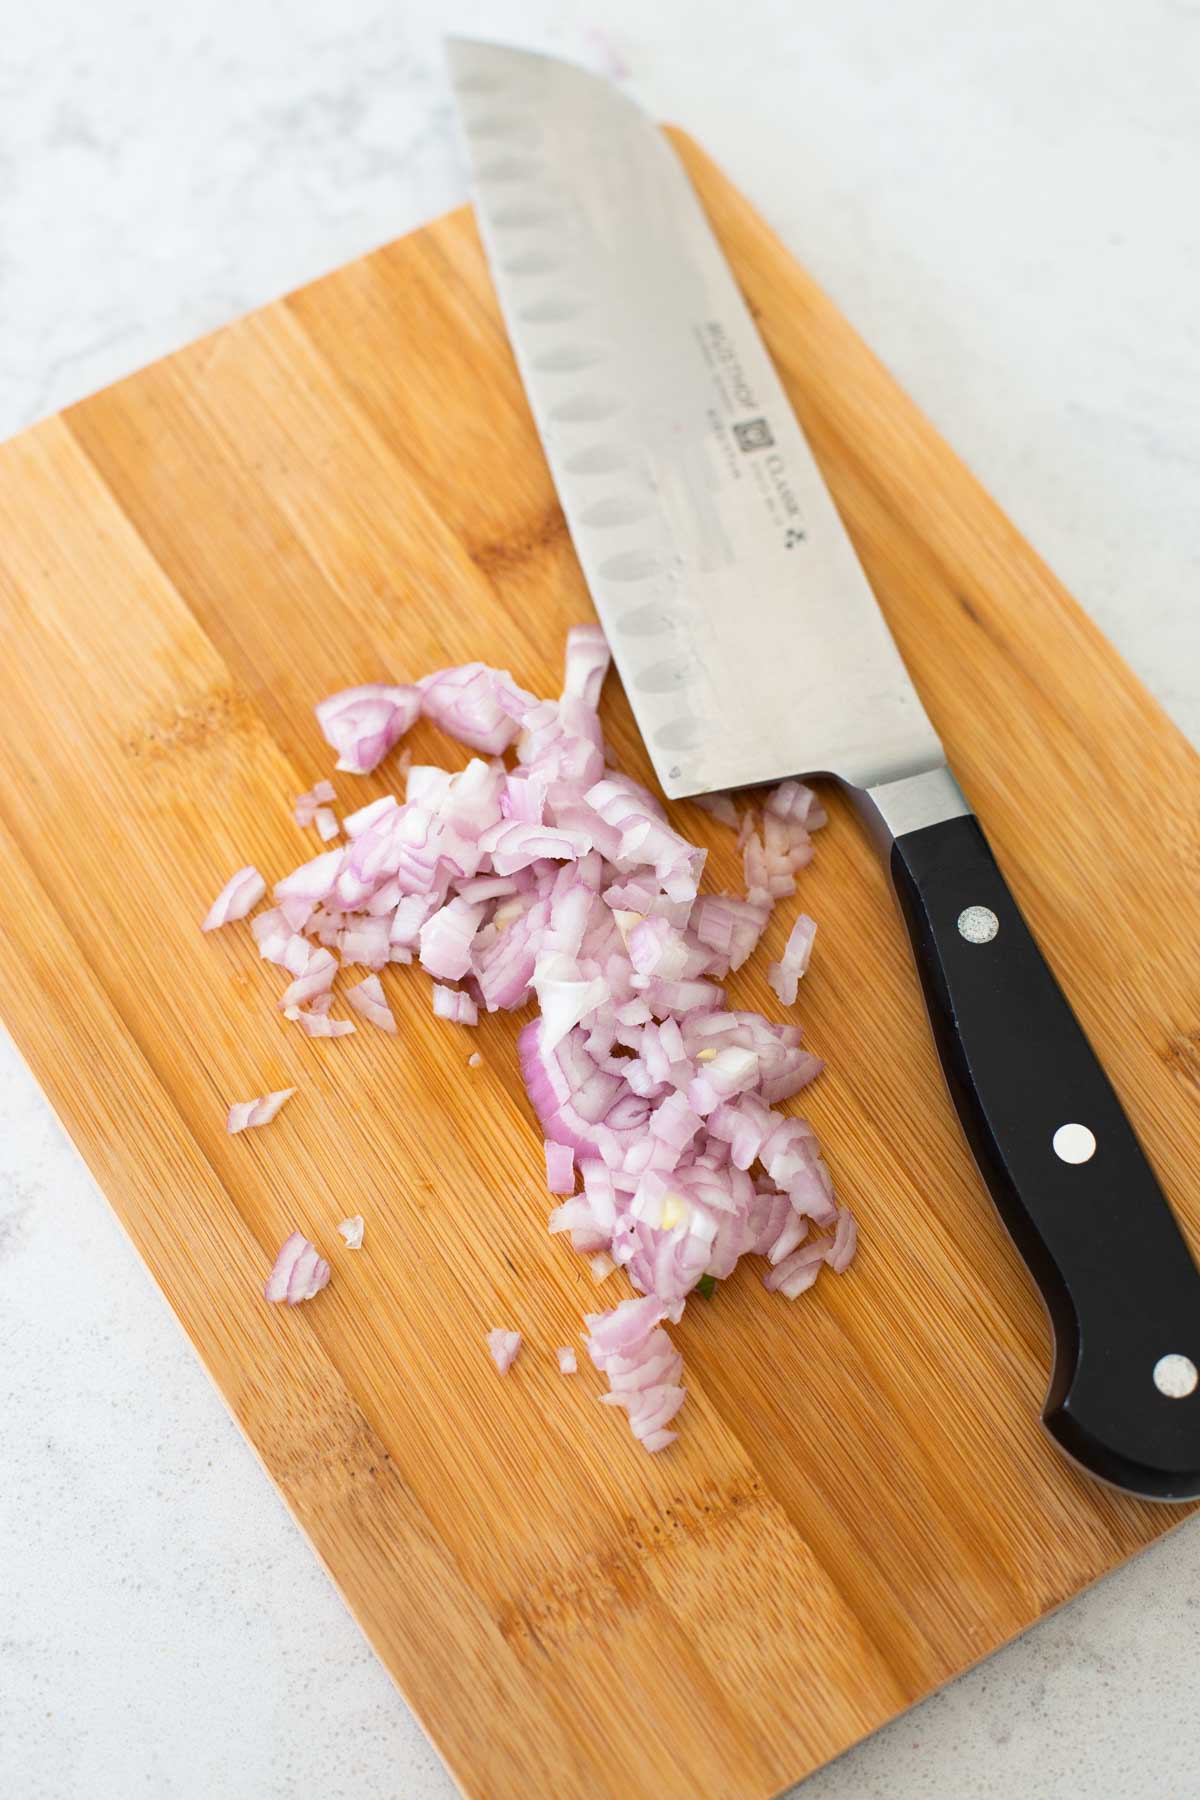 A shallot has been minced by a chef knife.